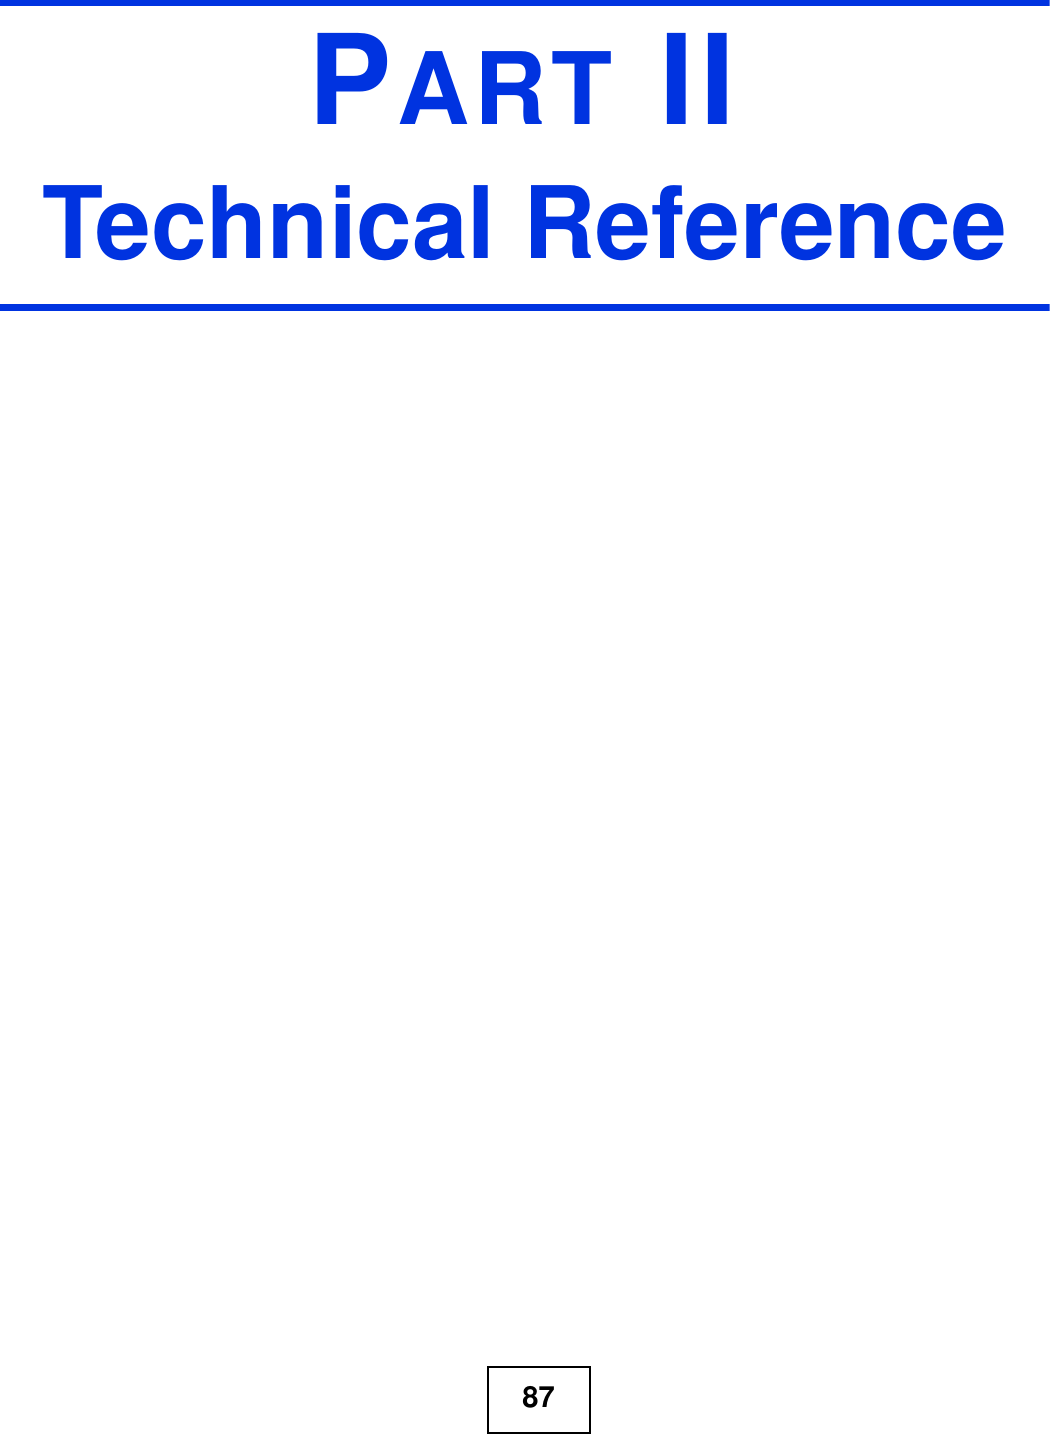 87PART IITechnical Reference